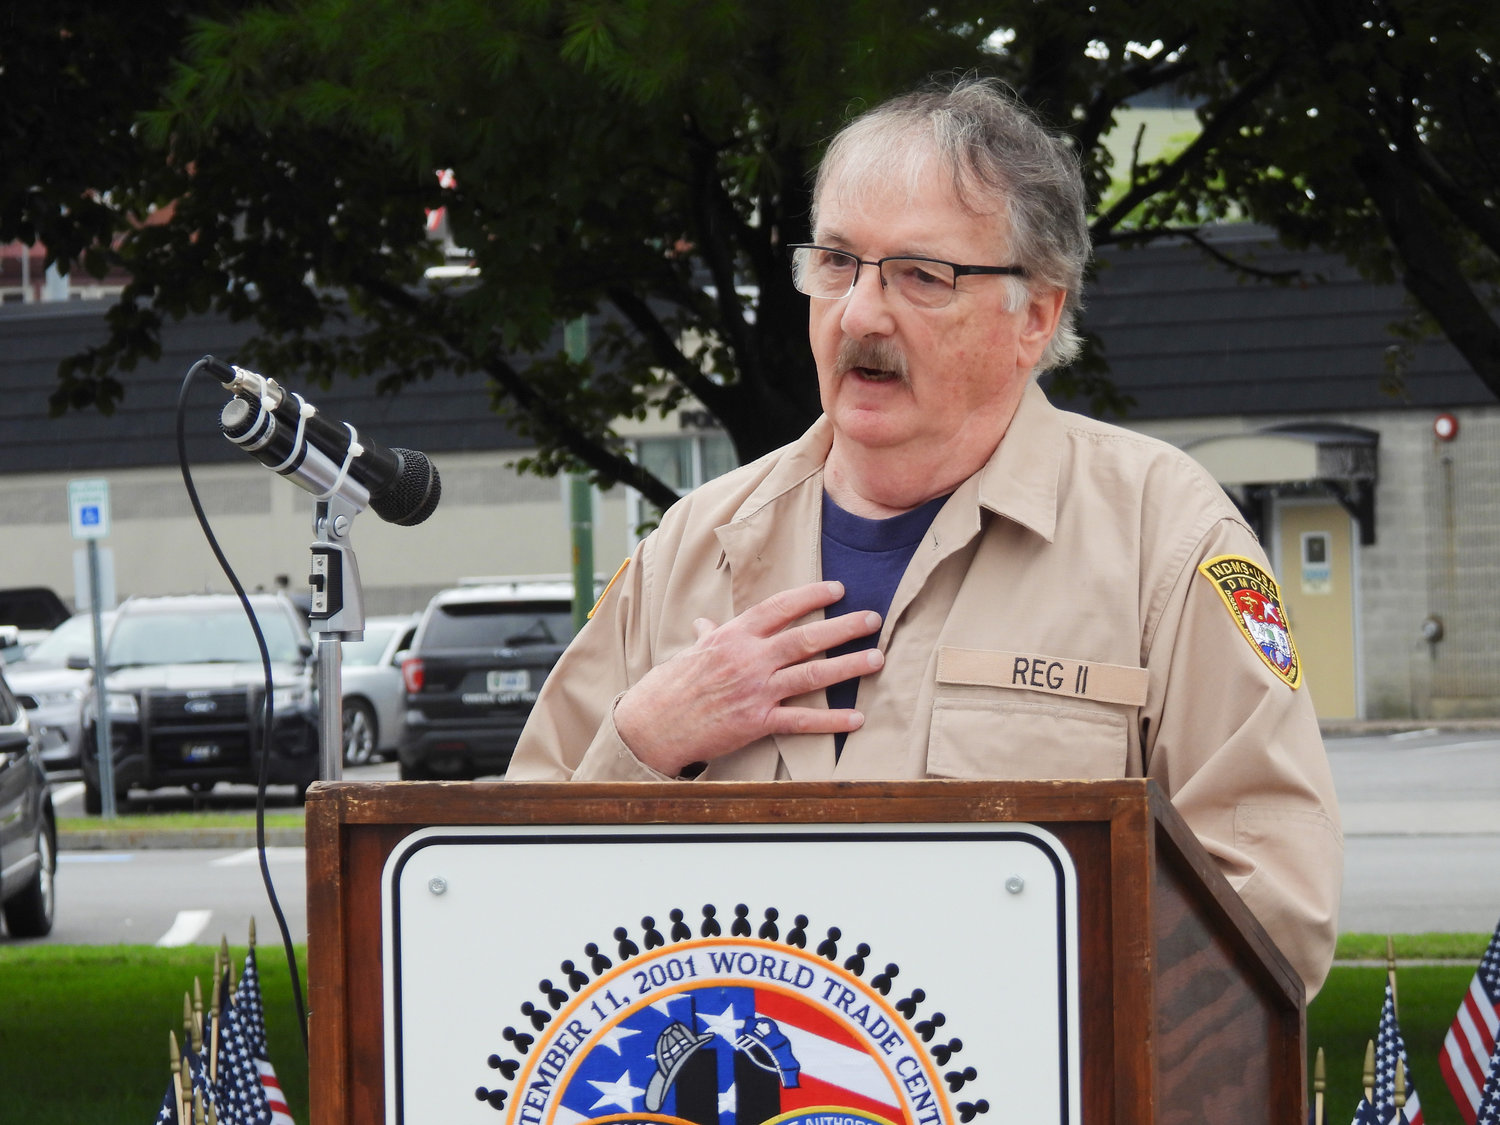 Former Madison County Undersheriff Douglas Bailey speaks at the city of Oneida's 9/11 Remembrance Ceremony on Sunday, recounting his time as a member of the Federal National Disaster Medical System's Disaster Mortuary Response Team during 9/11.